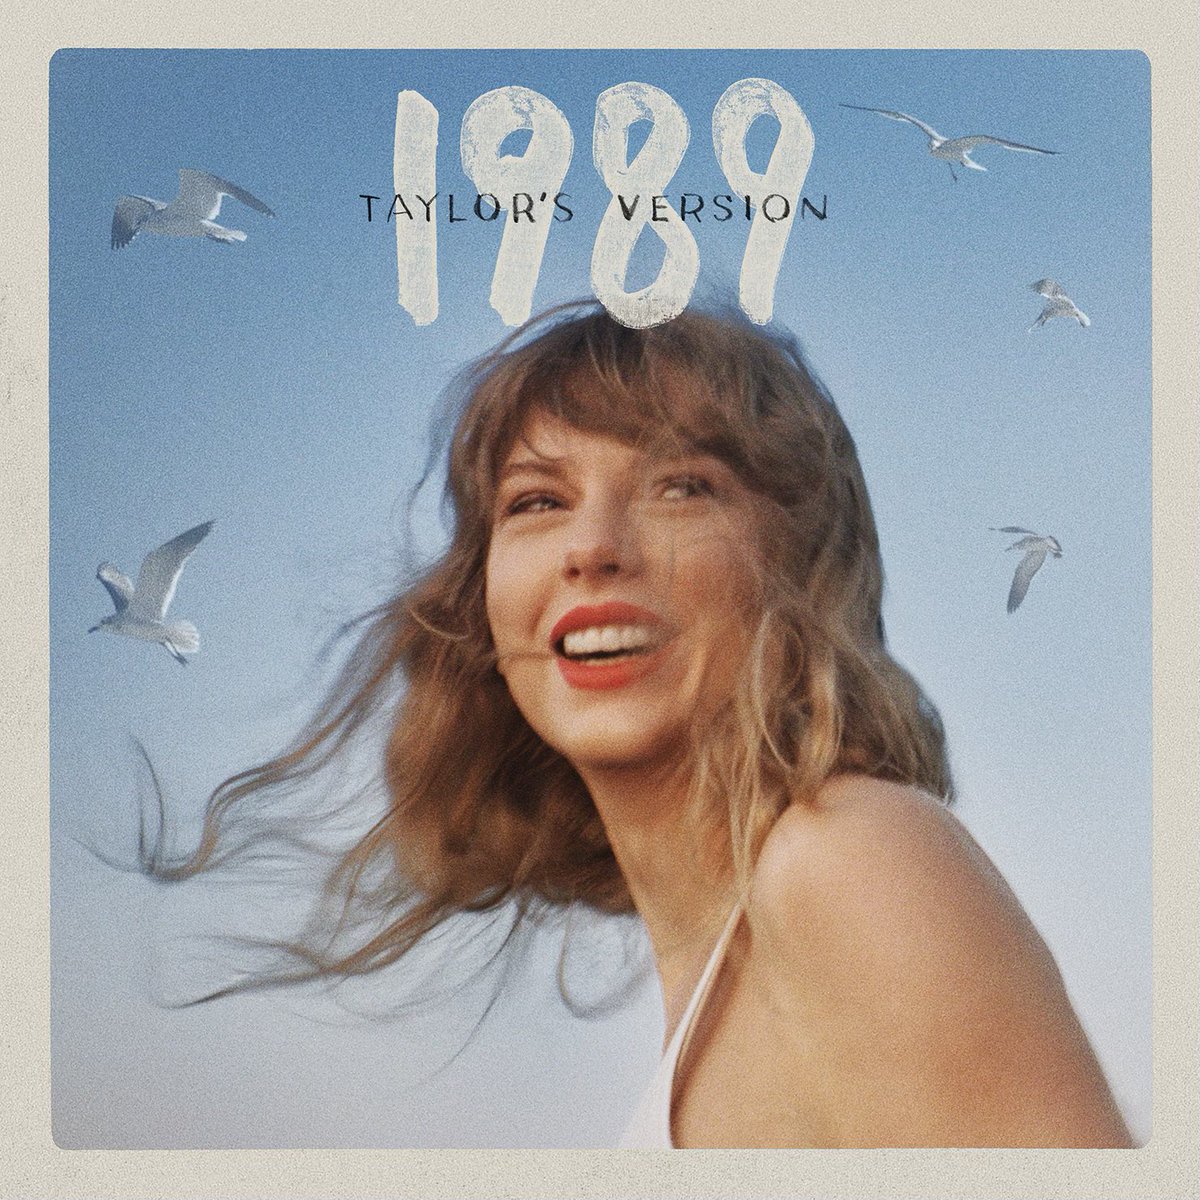 Our wildest dreams are coming true. #1989TaylorsVersion will be yours October 27 🩵